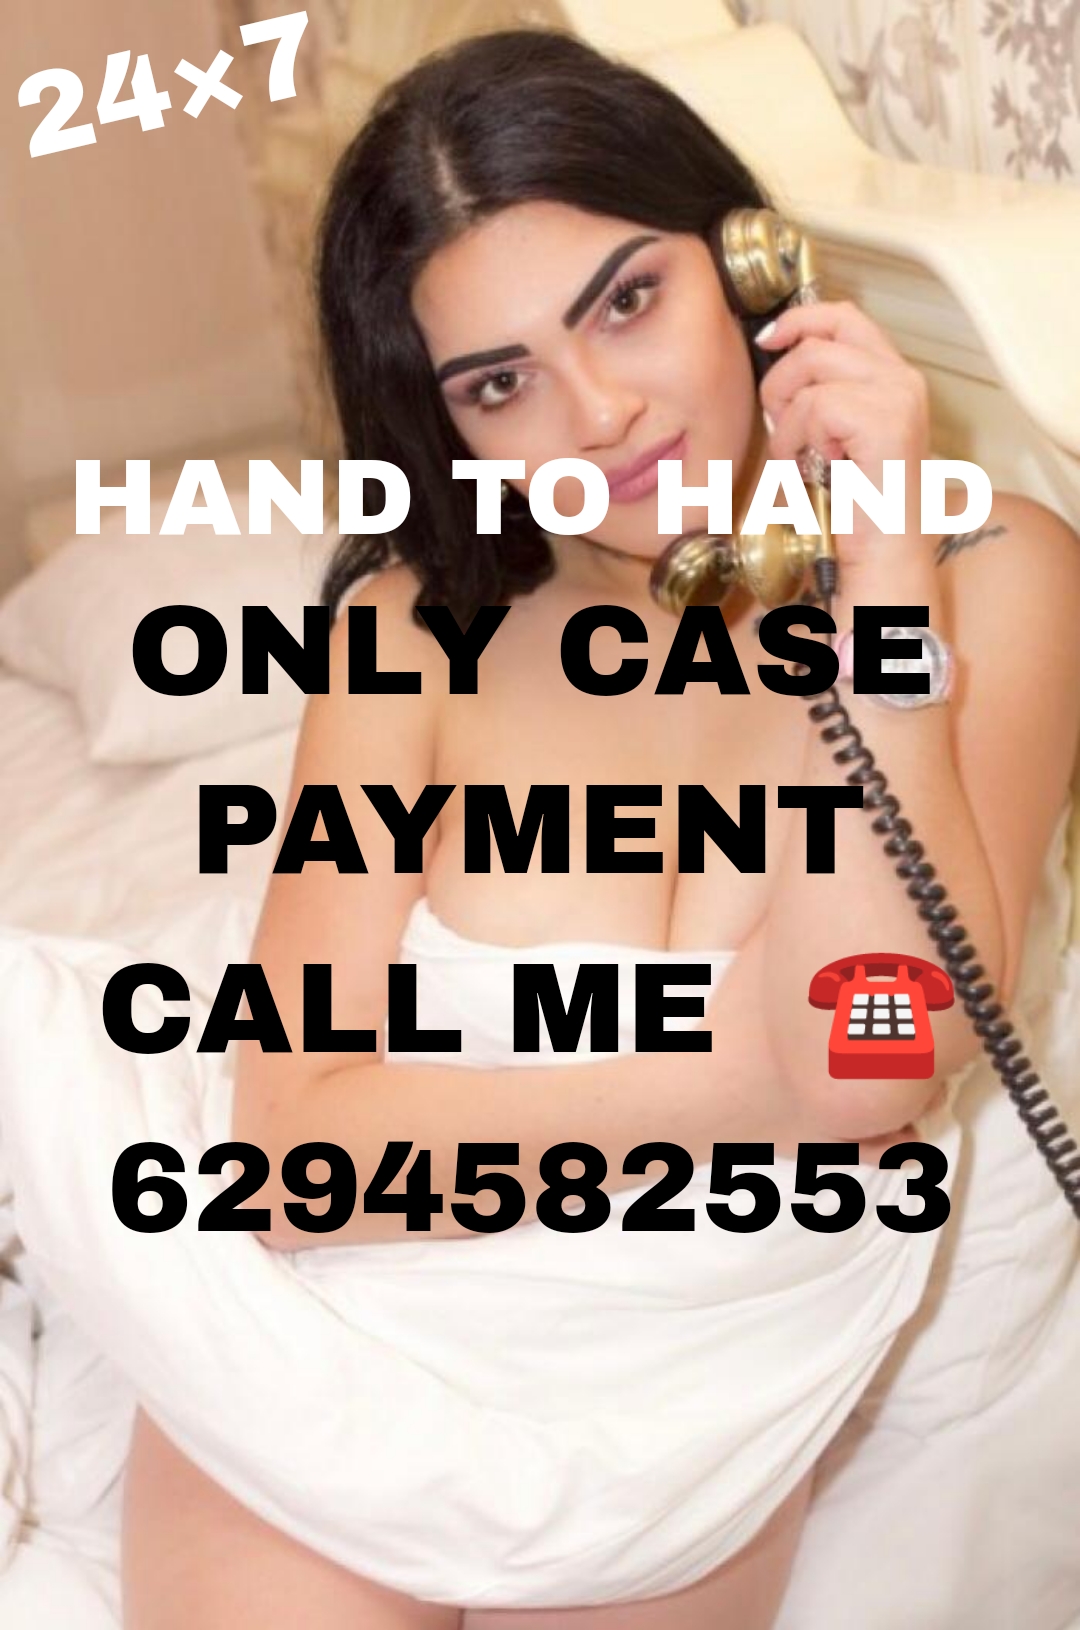 DILSUKHNAGAR SERVICE PROVIDE ONLY CASE PAYMENT 